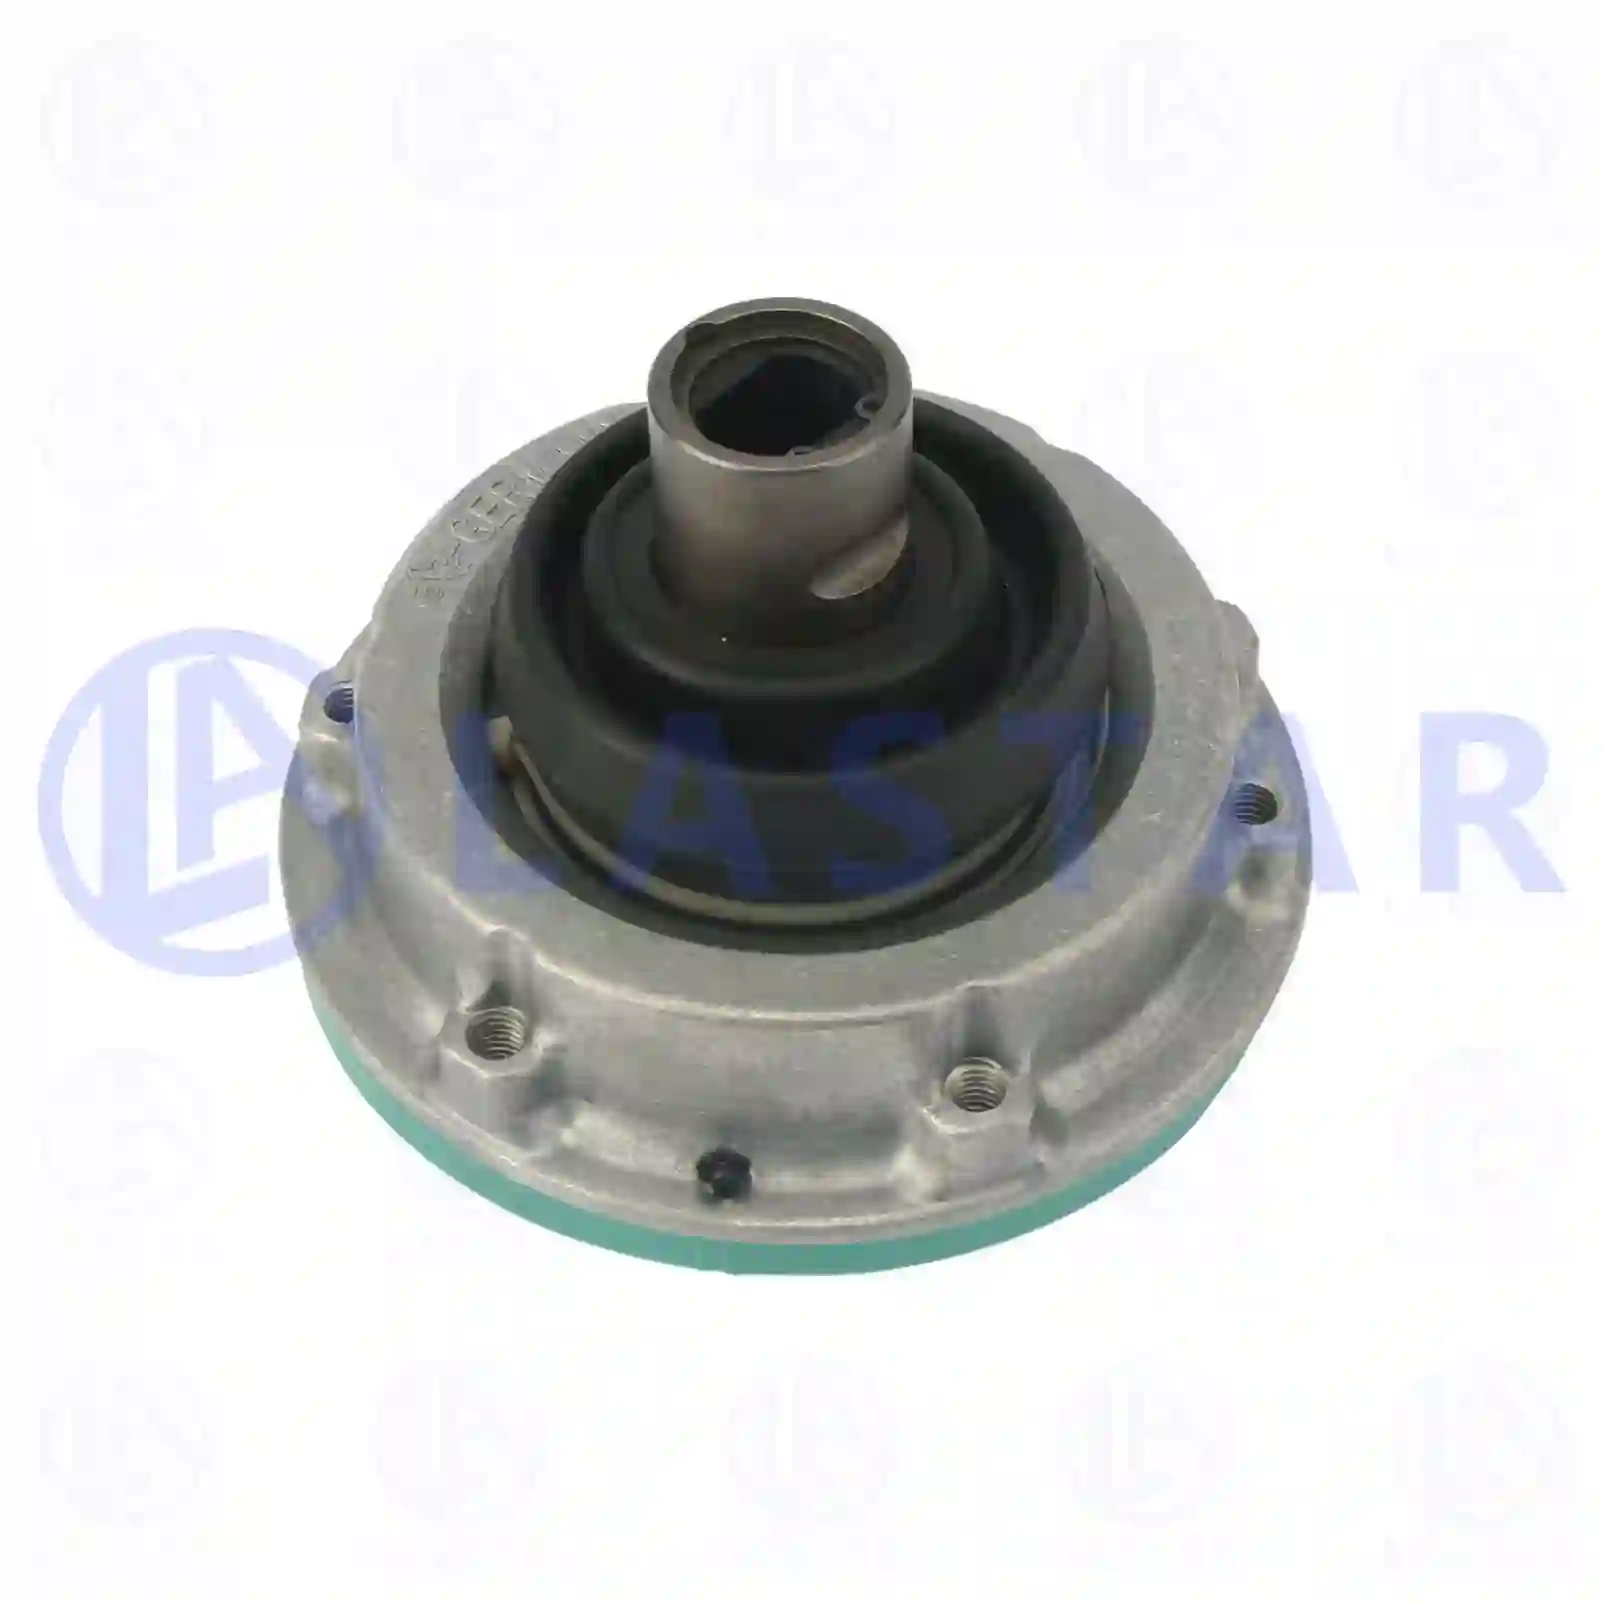 Gear shift joint, 77732091, 1669436, 1673695, 20366968, 3191939 ||  77732091 Lastar Spare Part | Truck Spare Parts, Auotomotive Spare Parts Gear shift joint, 77732091, 1669436, 1673695, 20366968, 3191939 ||  77732091 Lastar Spare Part | Truck Spare Parts, Auotomotive Spare Parts